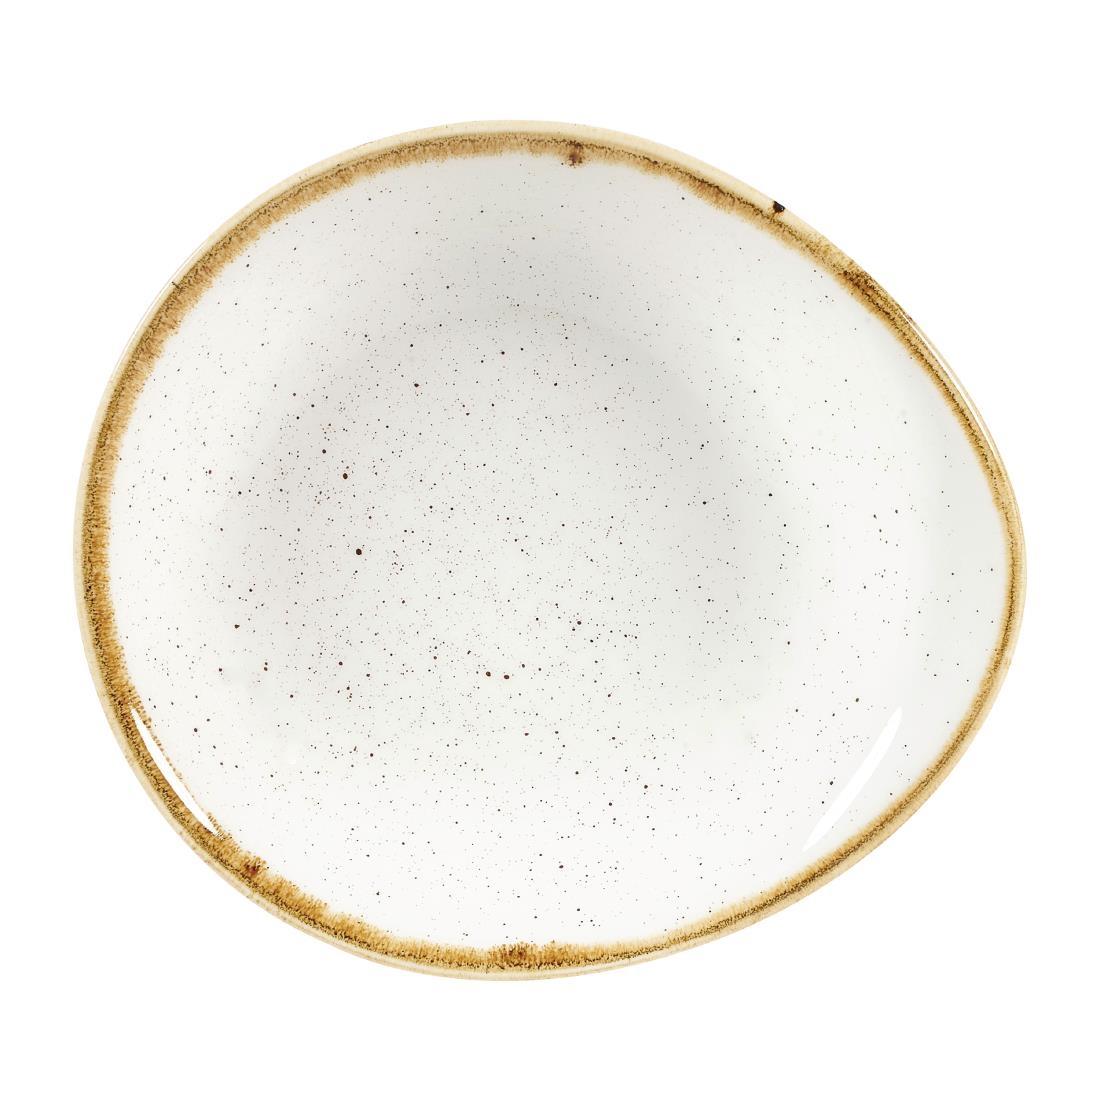 Churchill Stonecast Round Dishes Barley White 185mm (Pack of 12) - DY873  - 1